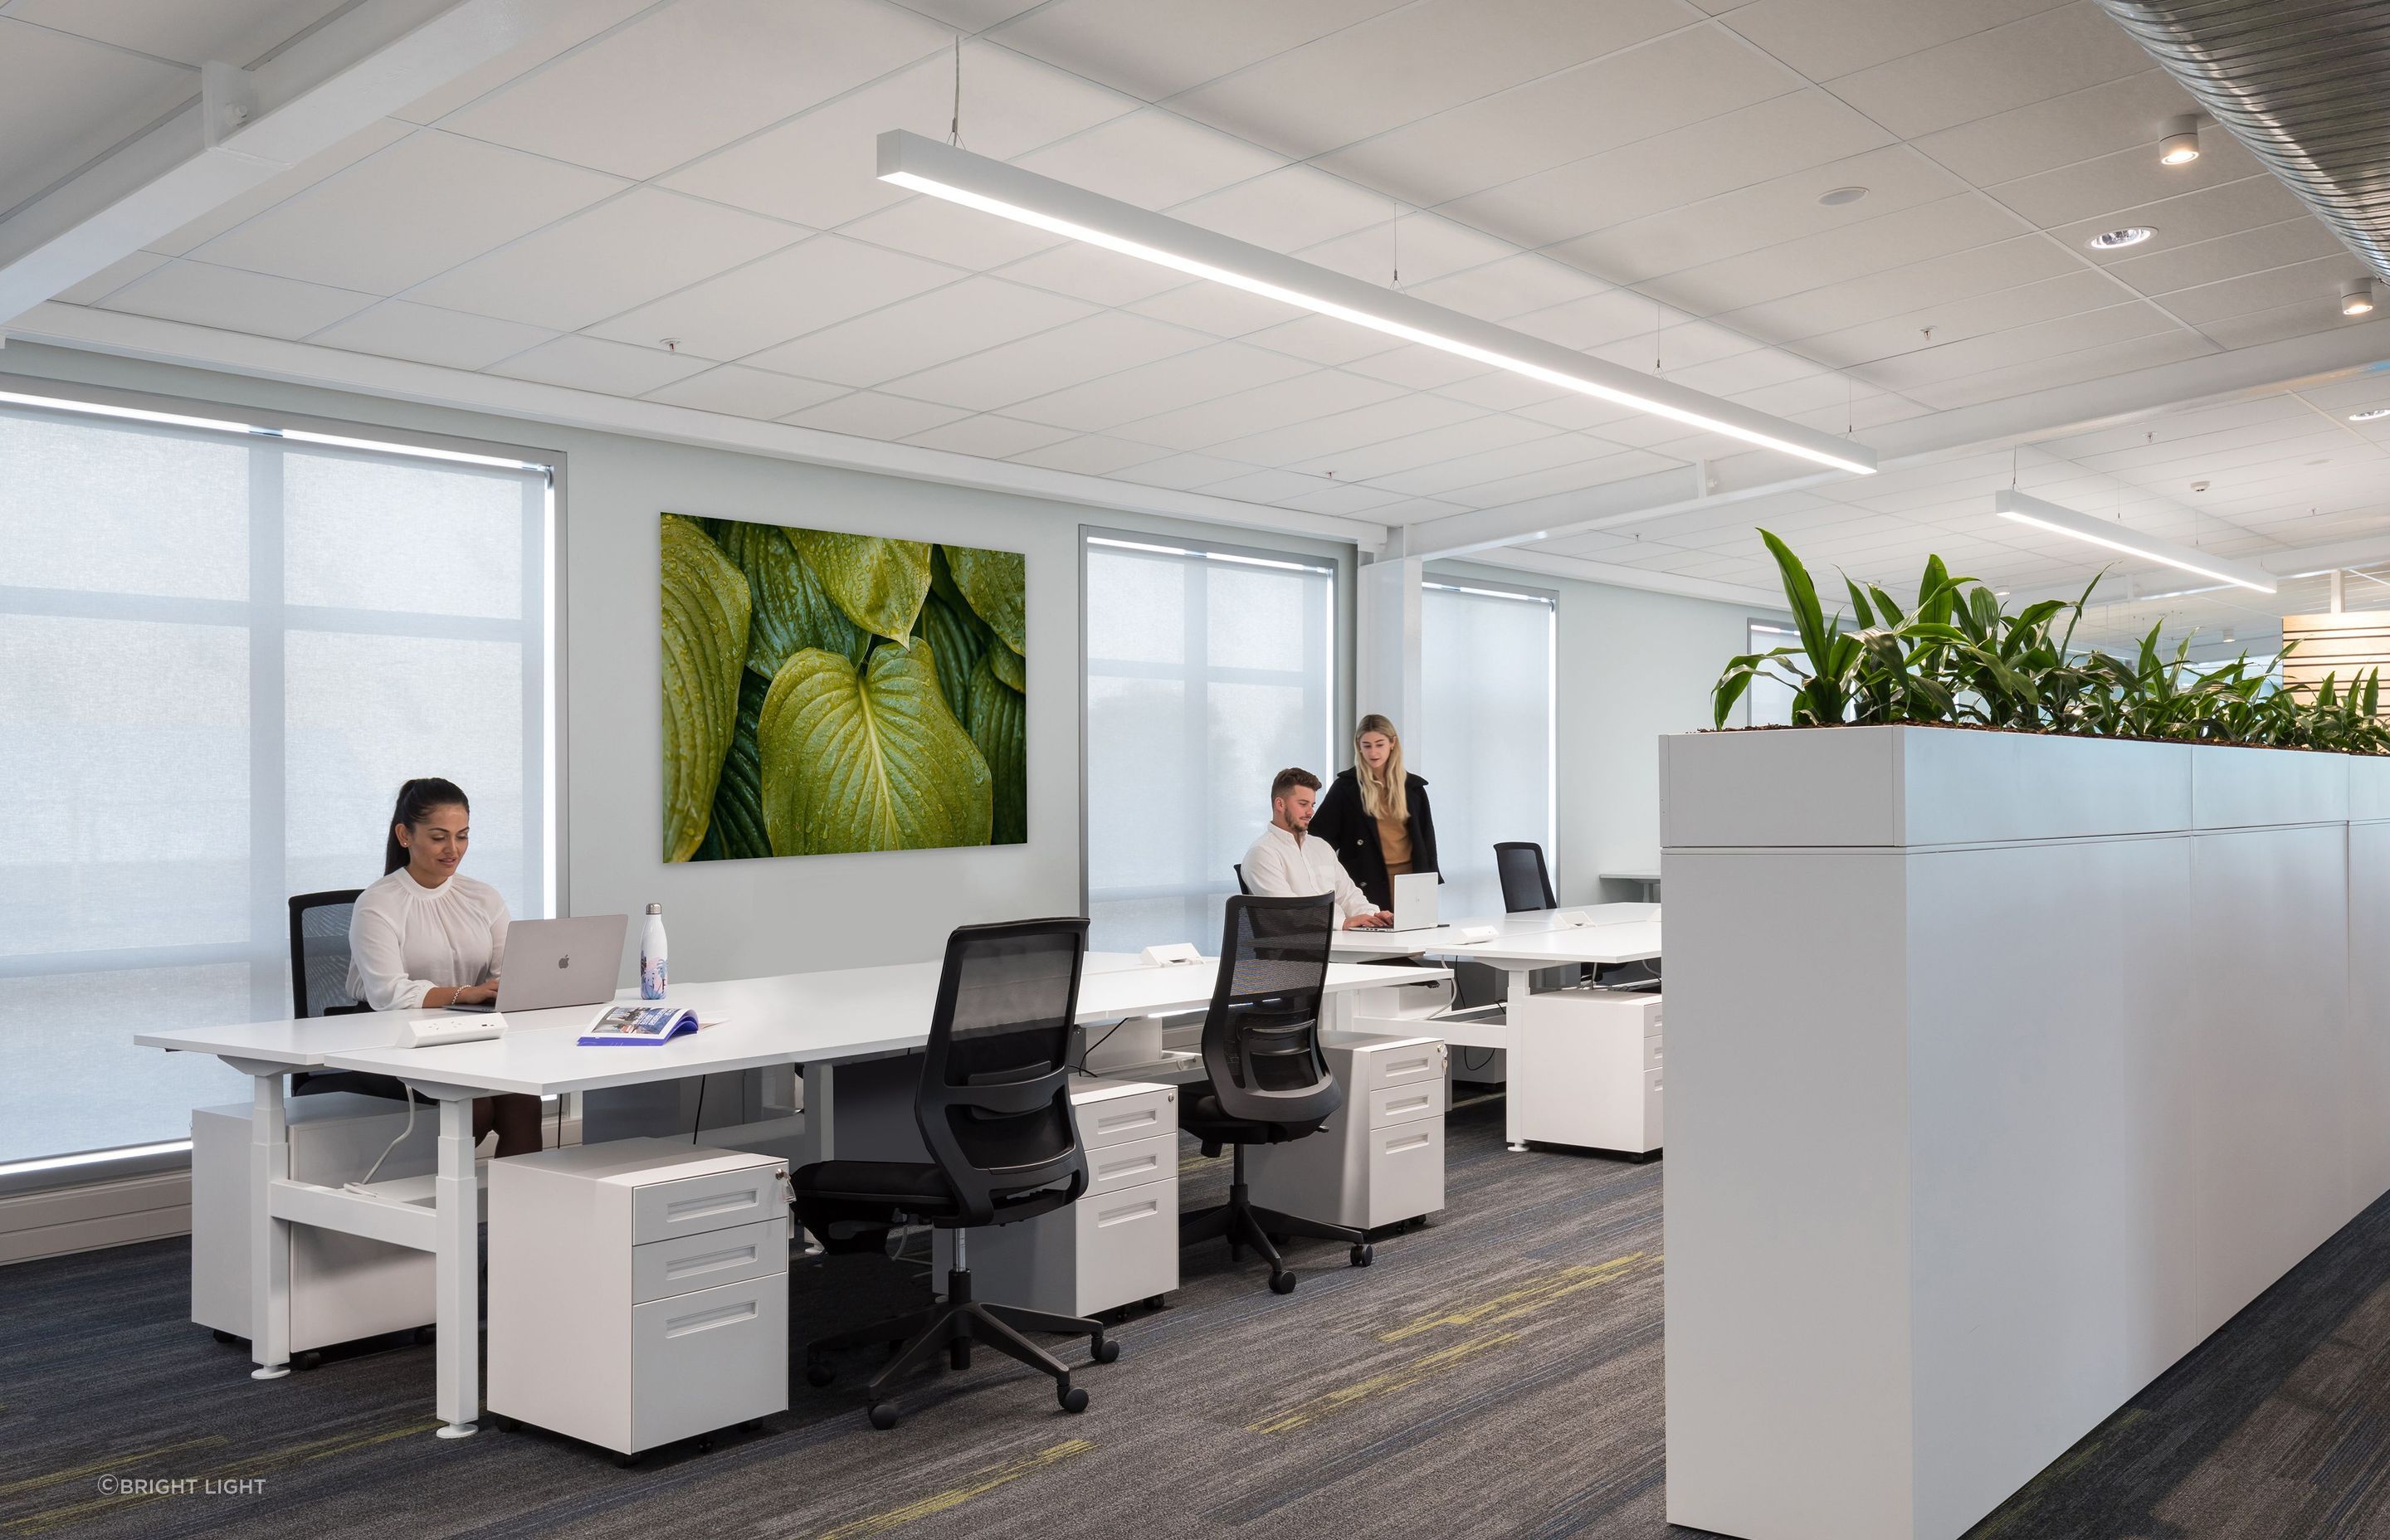 Available in either 3000K warm white or 4000K natural white, designers can use Element to create different working zones within the office space.